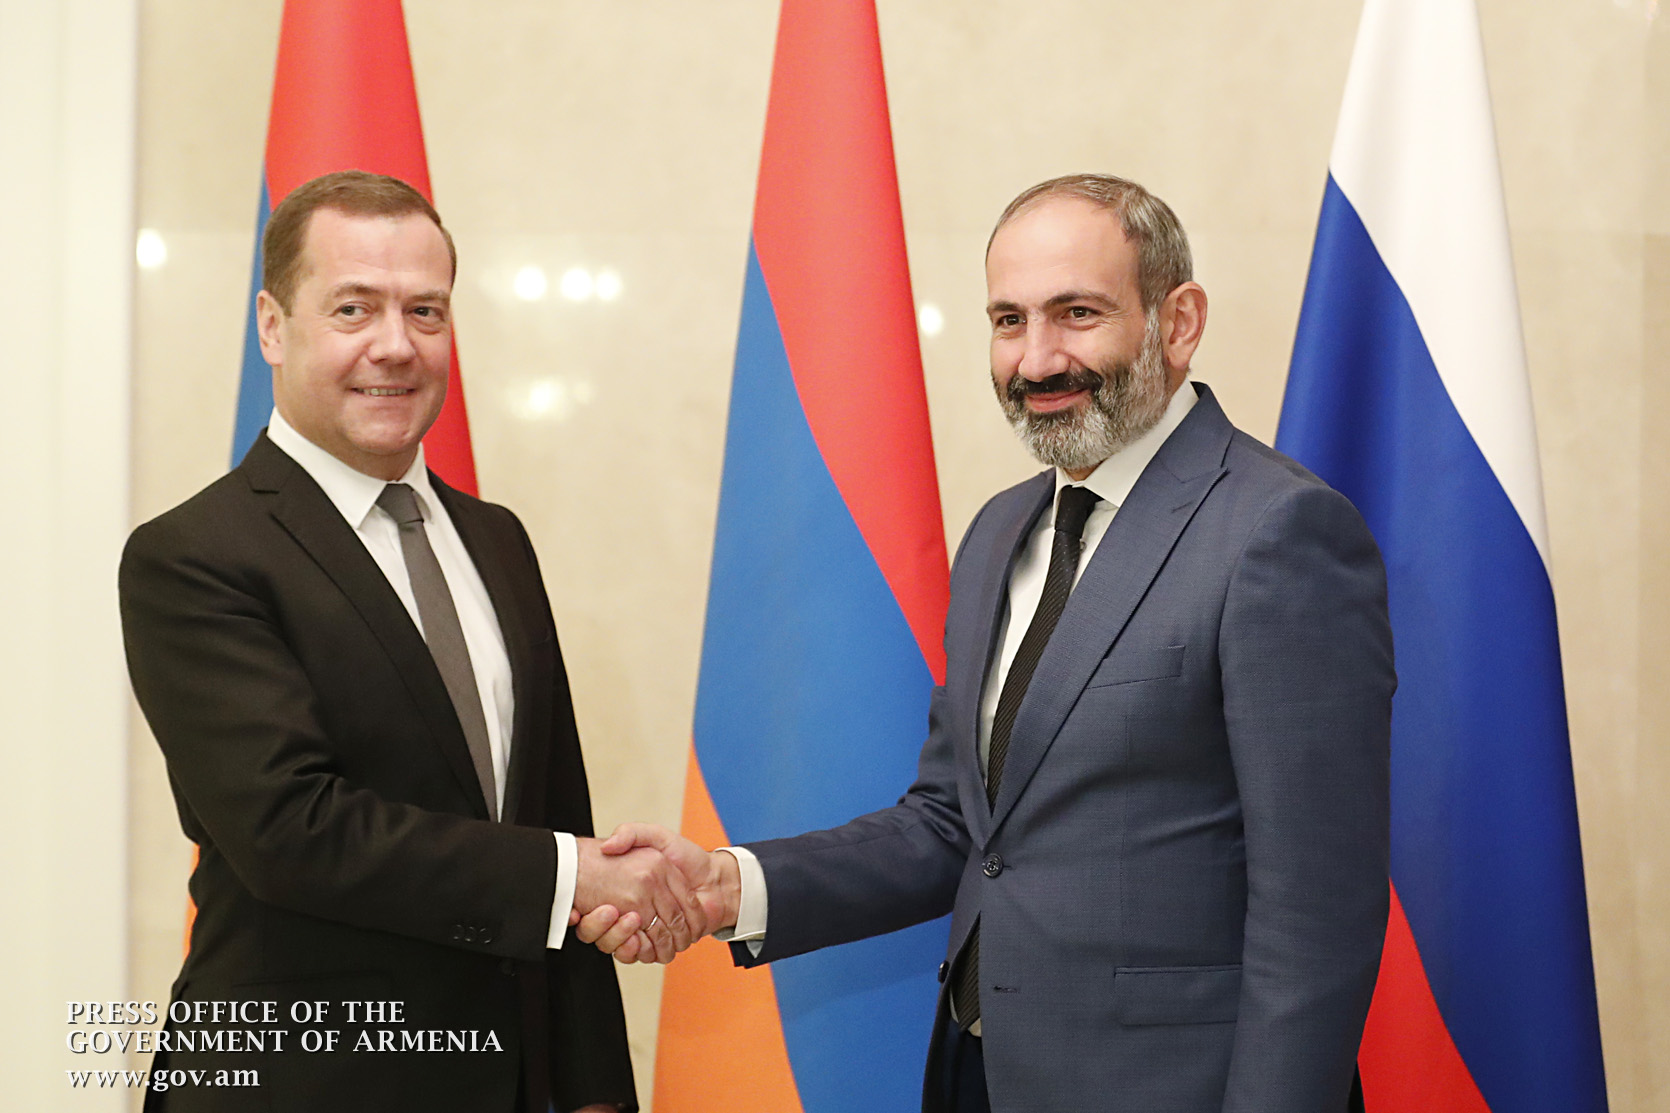 “Armenian-Russian relations are developing steadily and dynamically” – Nikol Pashinyan meets with Dmitry Medvedev